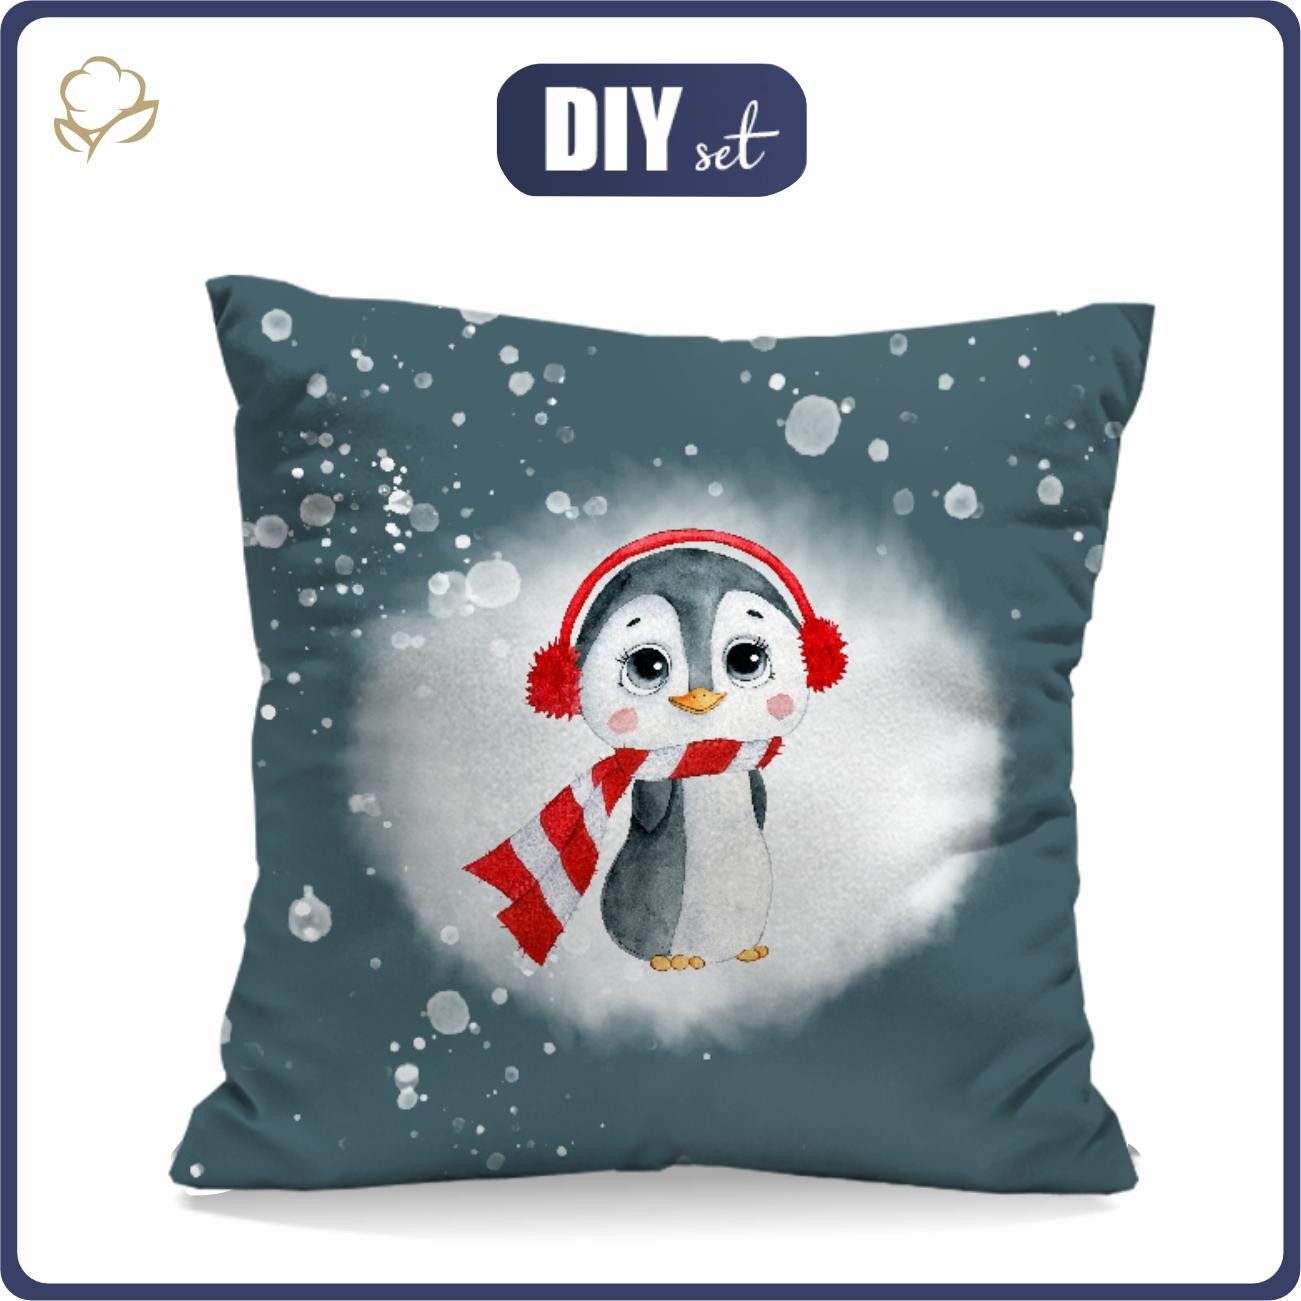 PILLOW 45X45 - ALBI THE WINTER PENGUIN - Waterproof woven fabric - sewing set